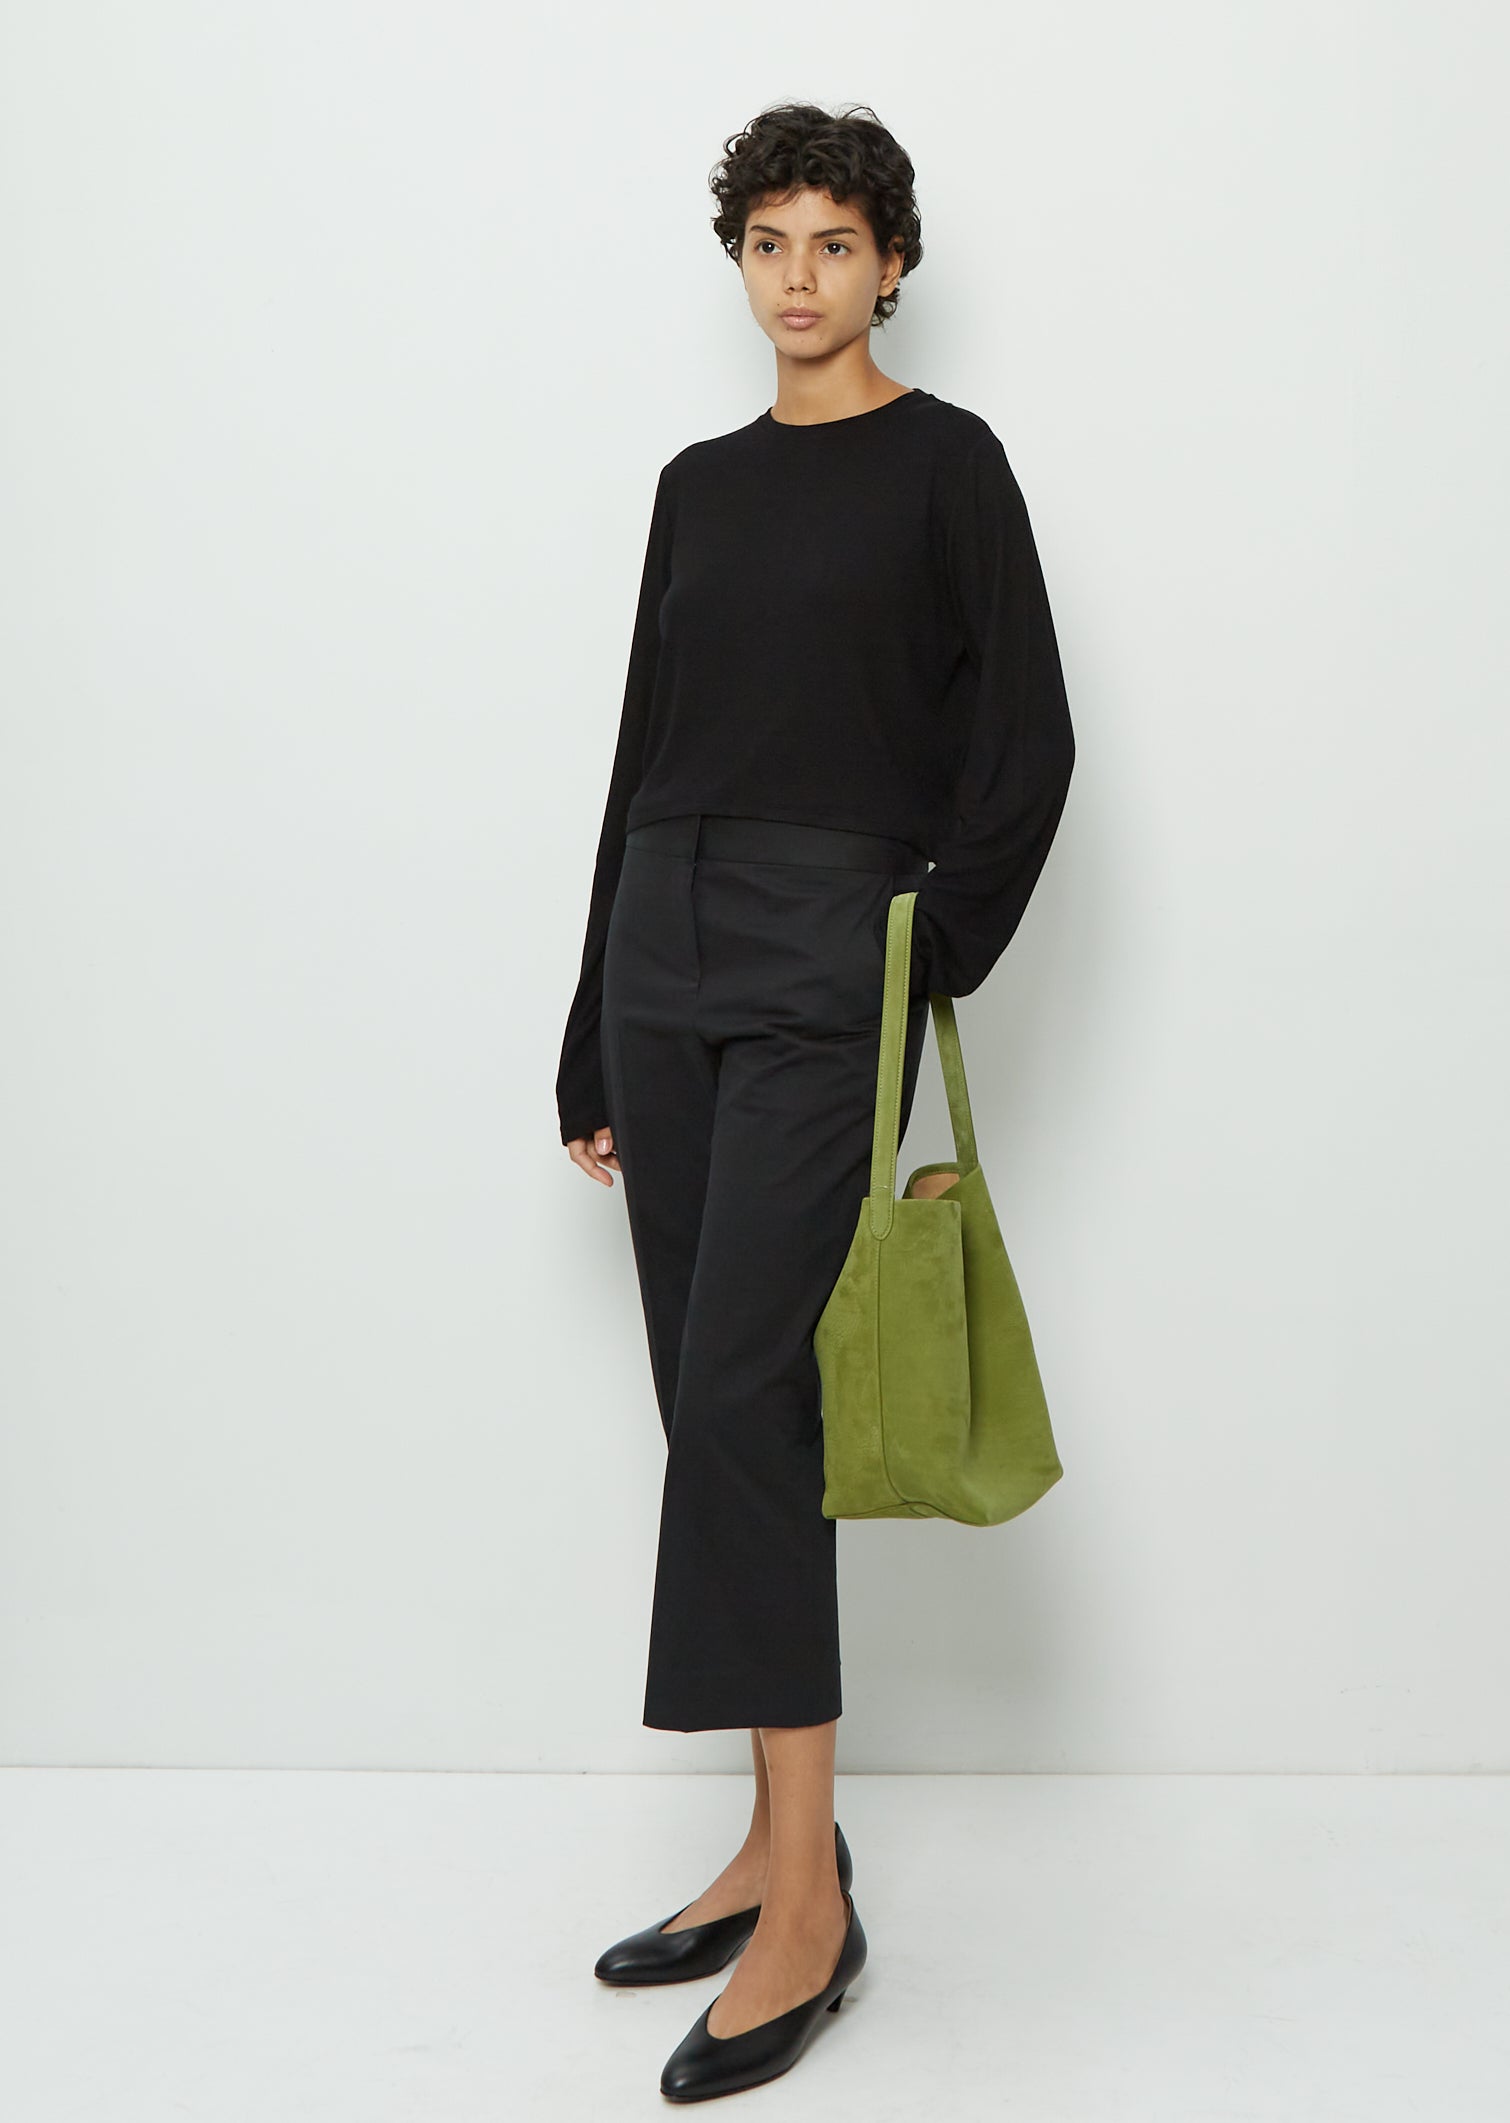 The Row Medium N/s Park Tote in Green